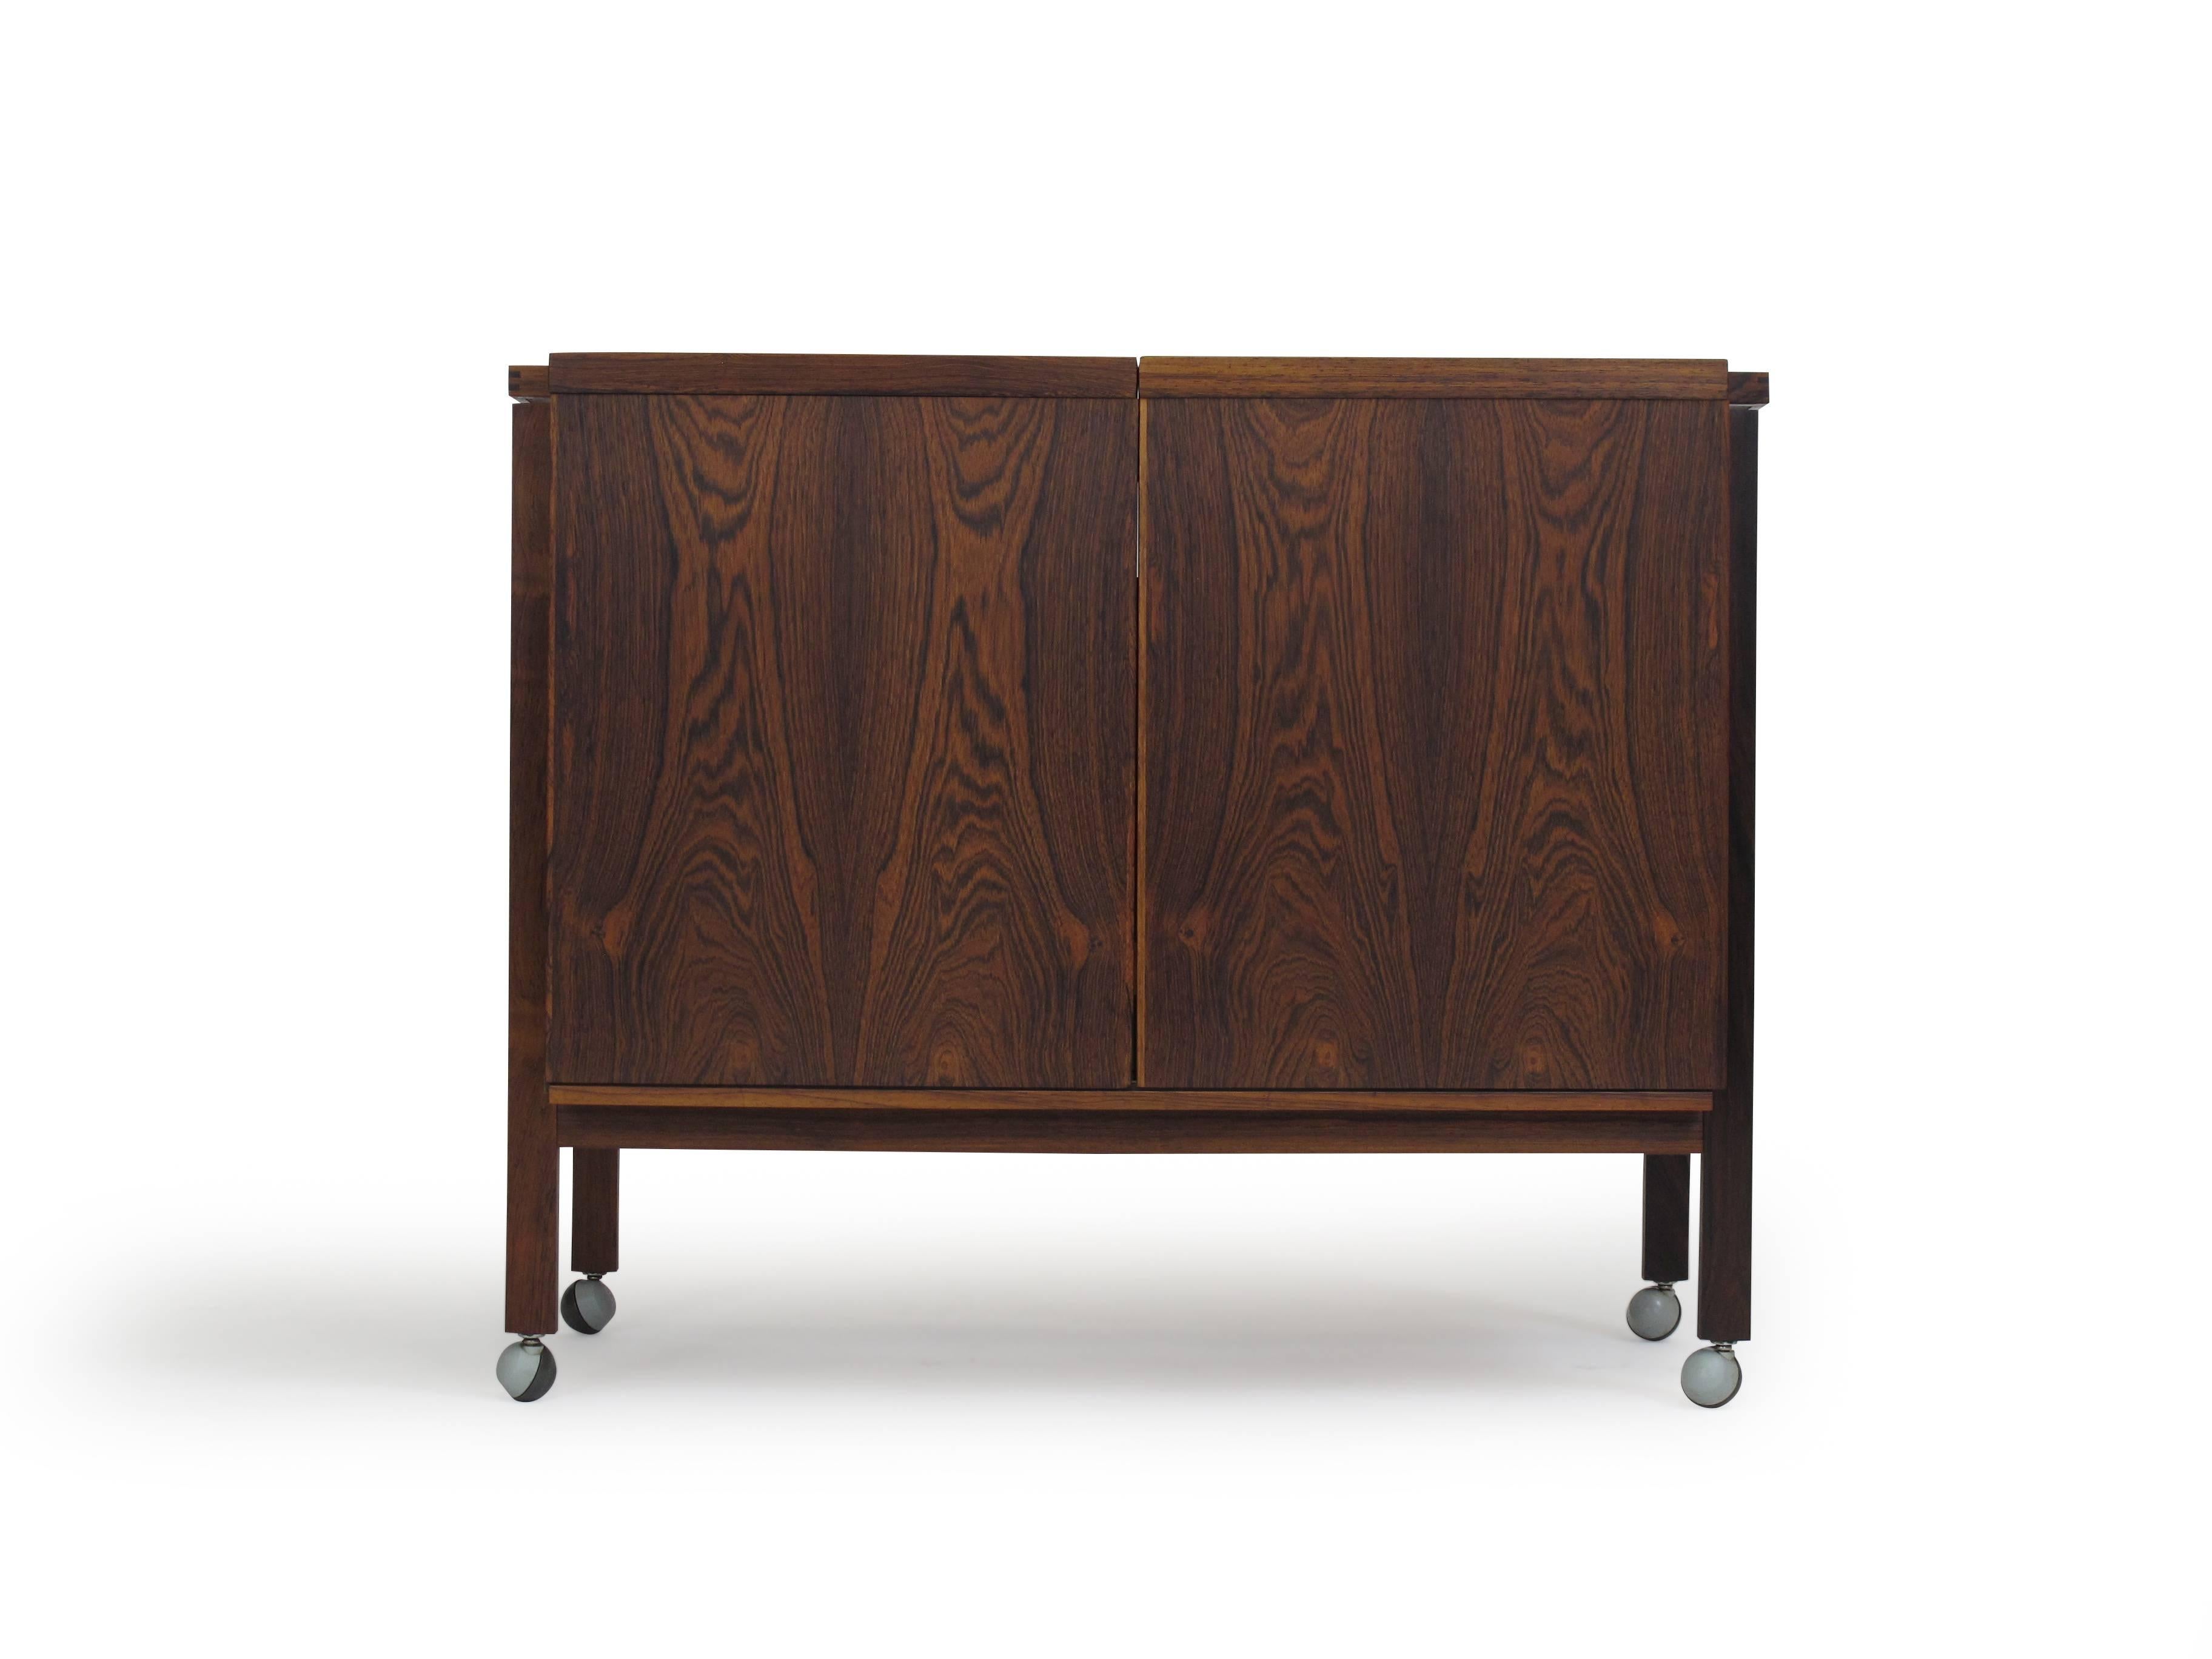 Niels Erik Glasdam Jensen expanding midcentury rosewood bar cabinet with two sections that slide out to reveal a stylish interior with a glass shelf above bottle storage with white sliding dividers. White laminated top for mixing drinks. Cabinet